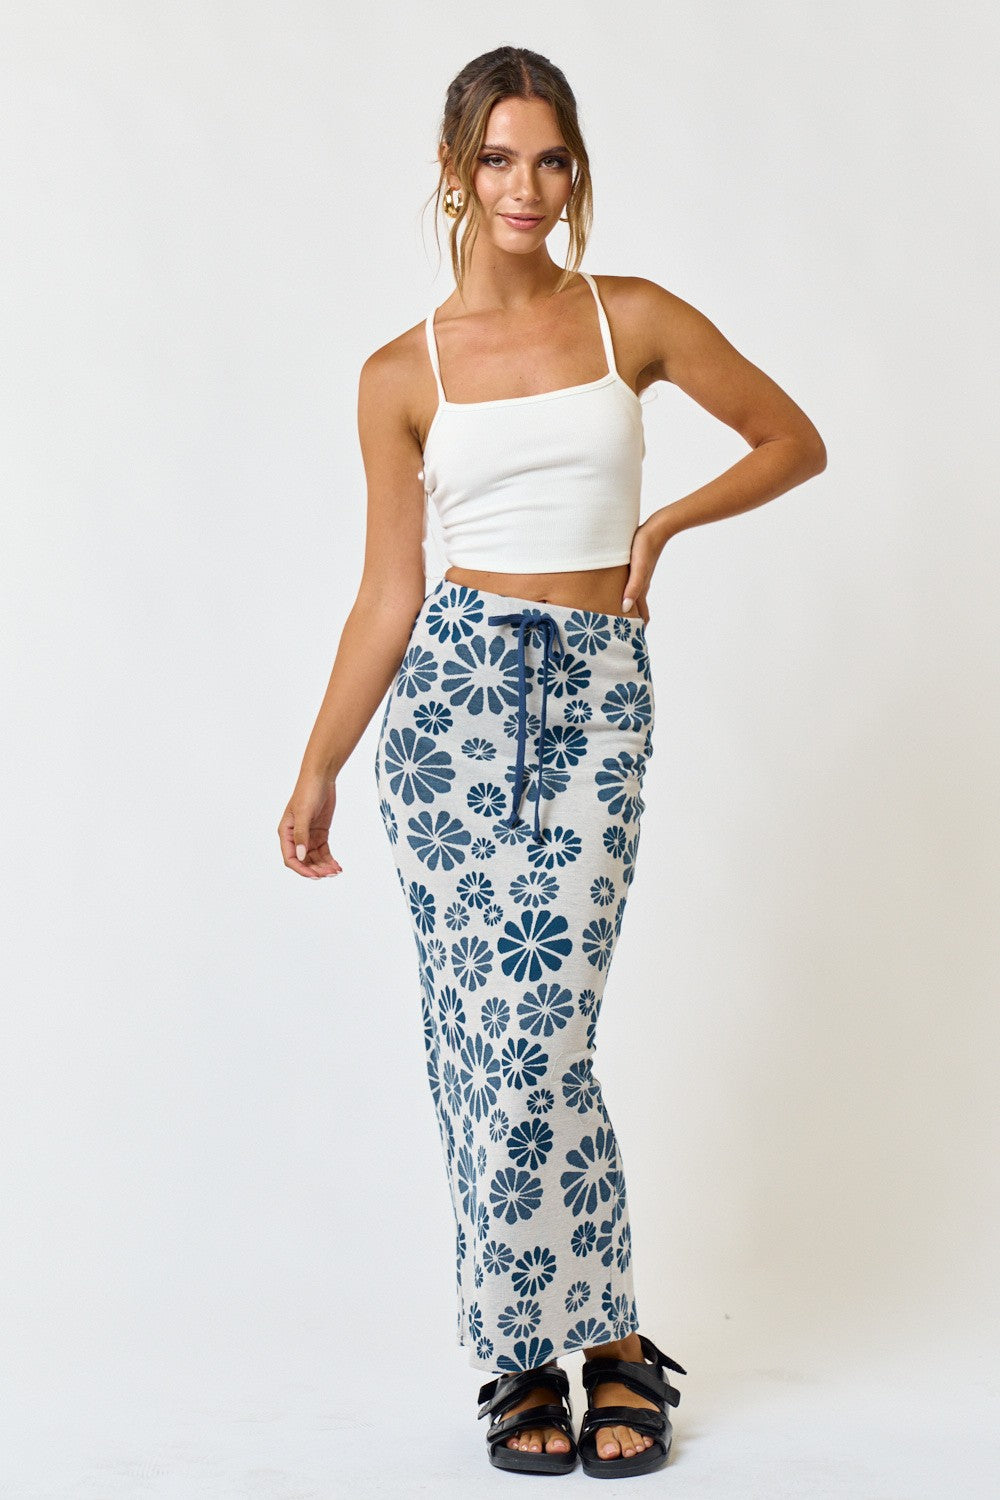 Floral Print Maxi Skirt: Slim fit with adjustable tie waist, back slit, and captivating floral design. Effortlessly stylish and machine washable for convenience. A versatile addition to your wardrobe for any occasion.